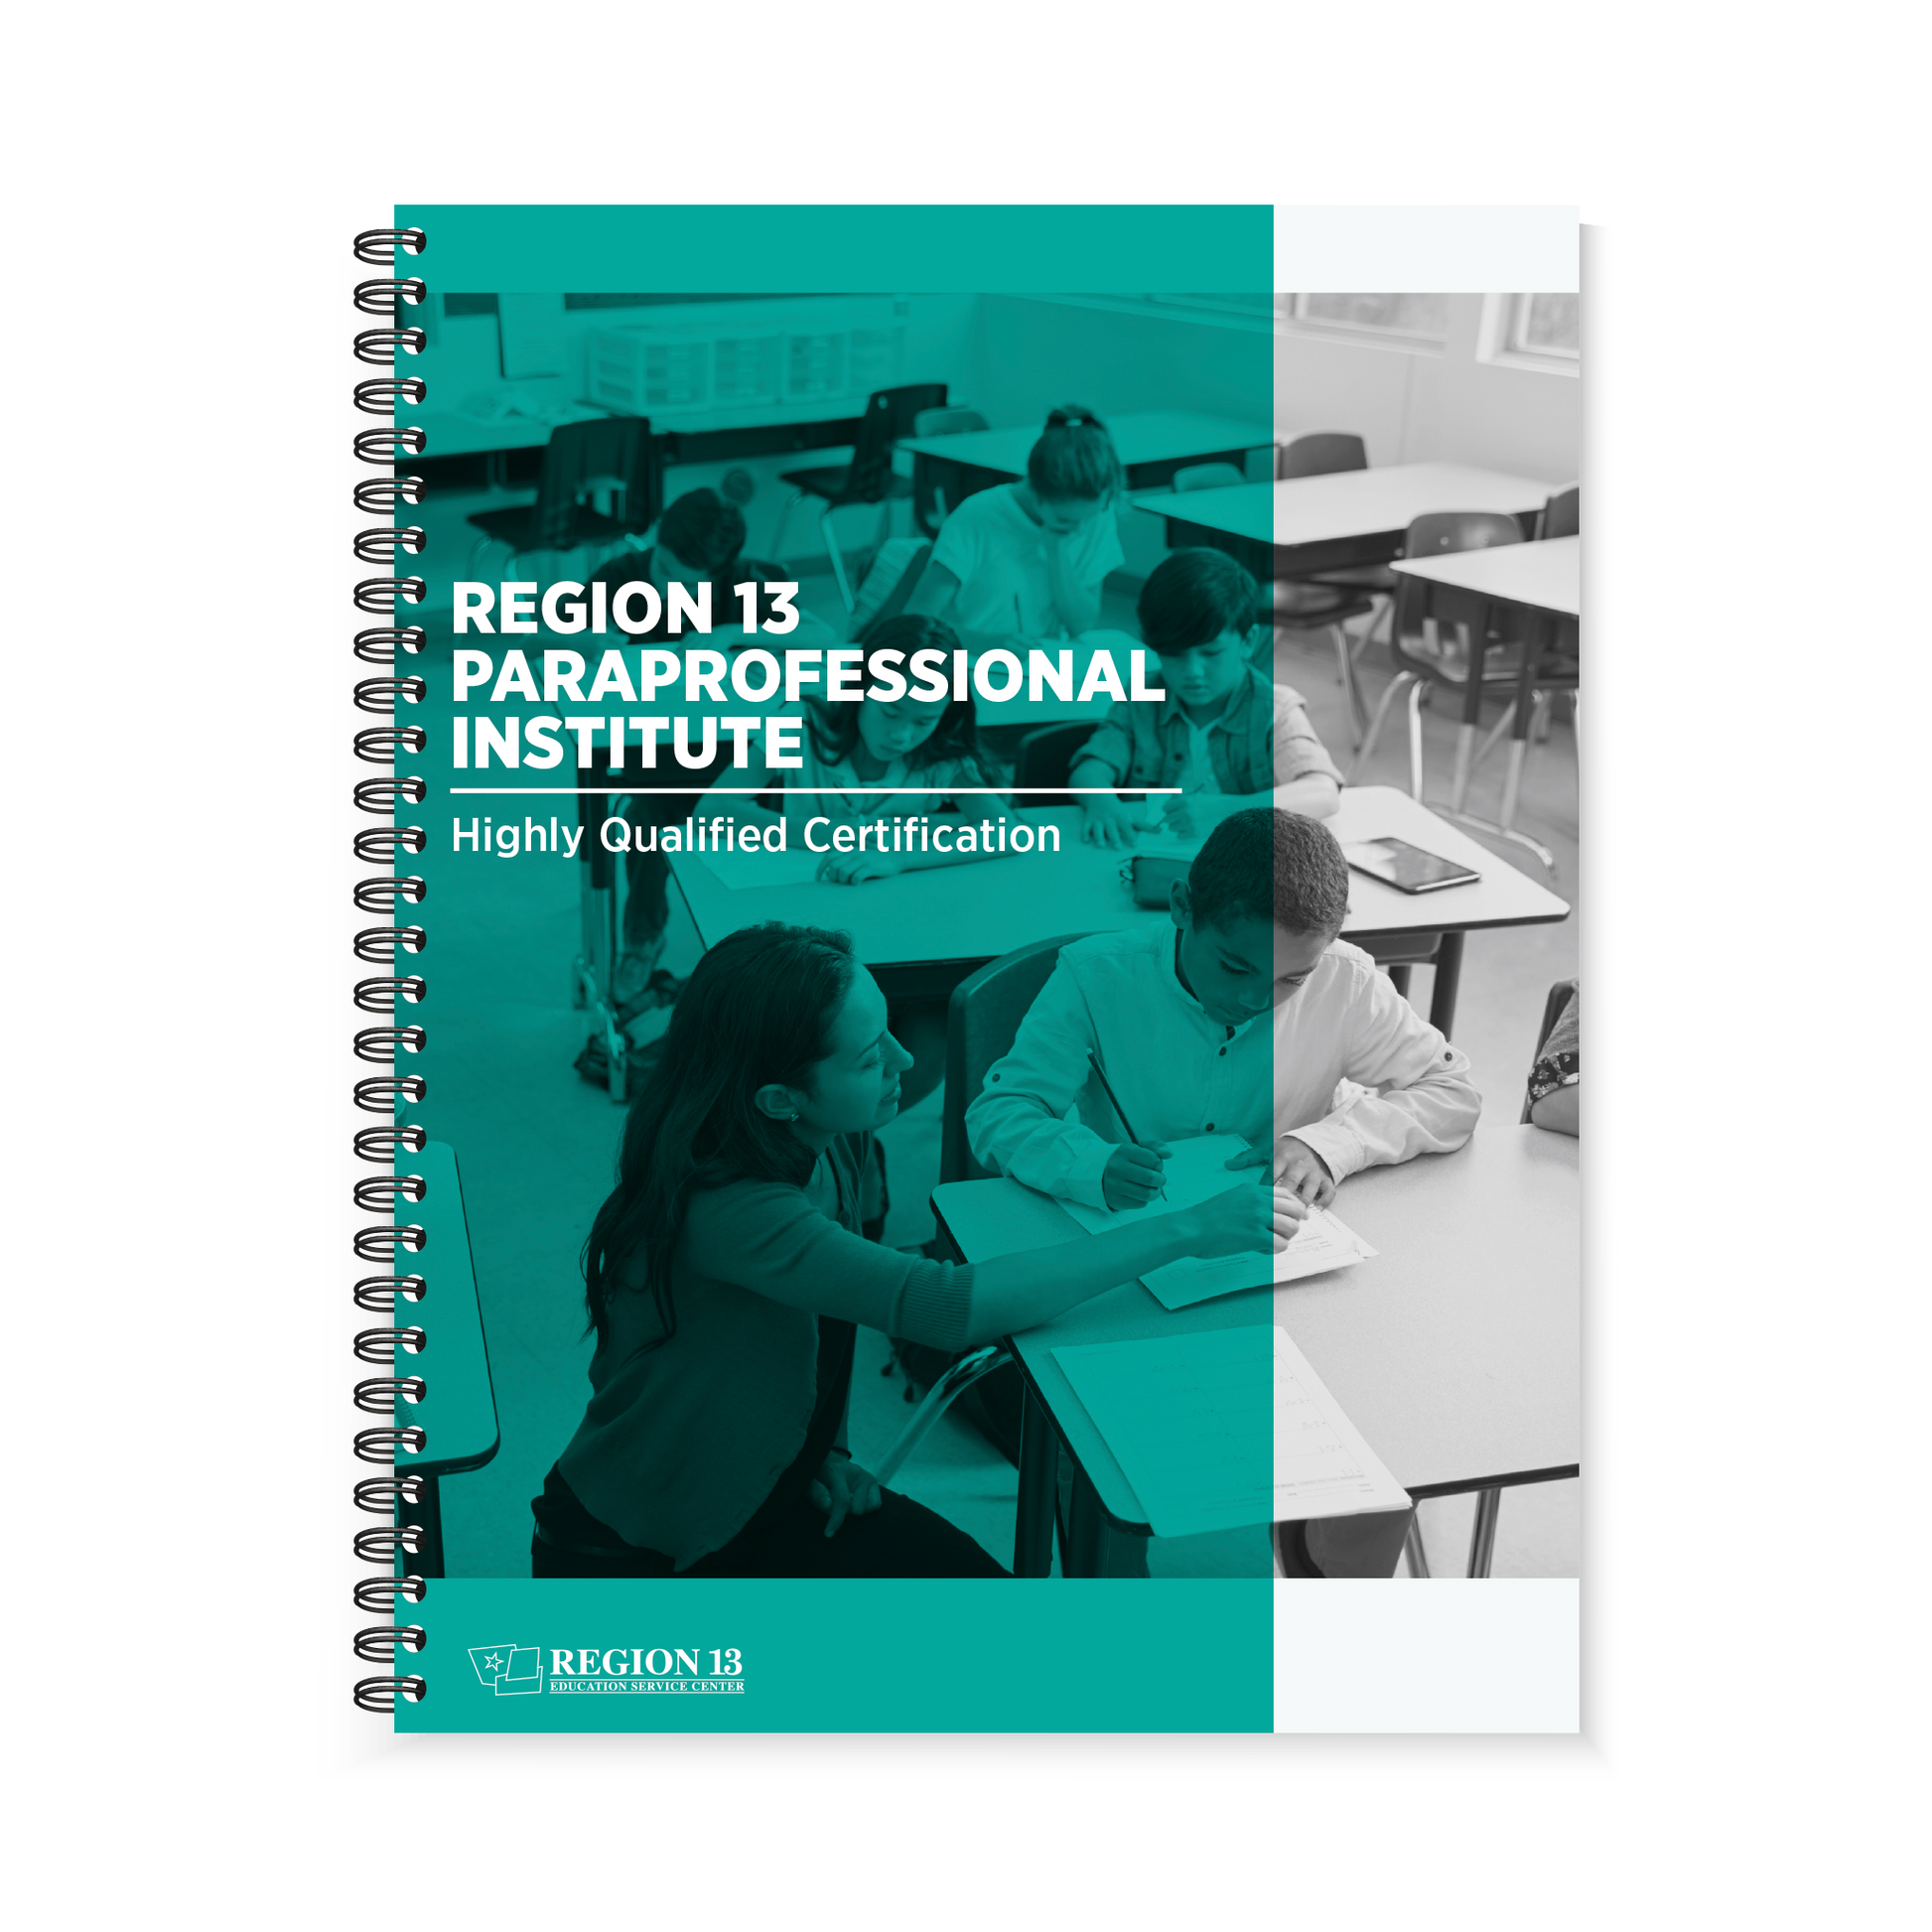 Teal and Gray cover of The Paraprofessional Institute Guidebook Spiral-Bound book featuring a teacher assisting seated students.